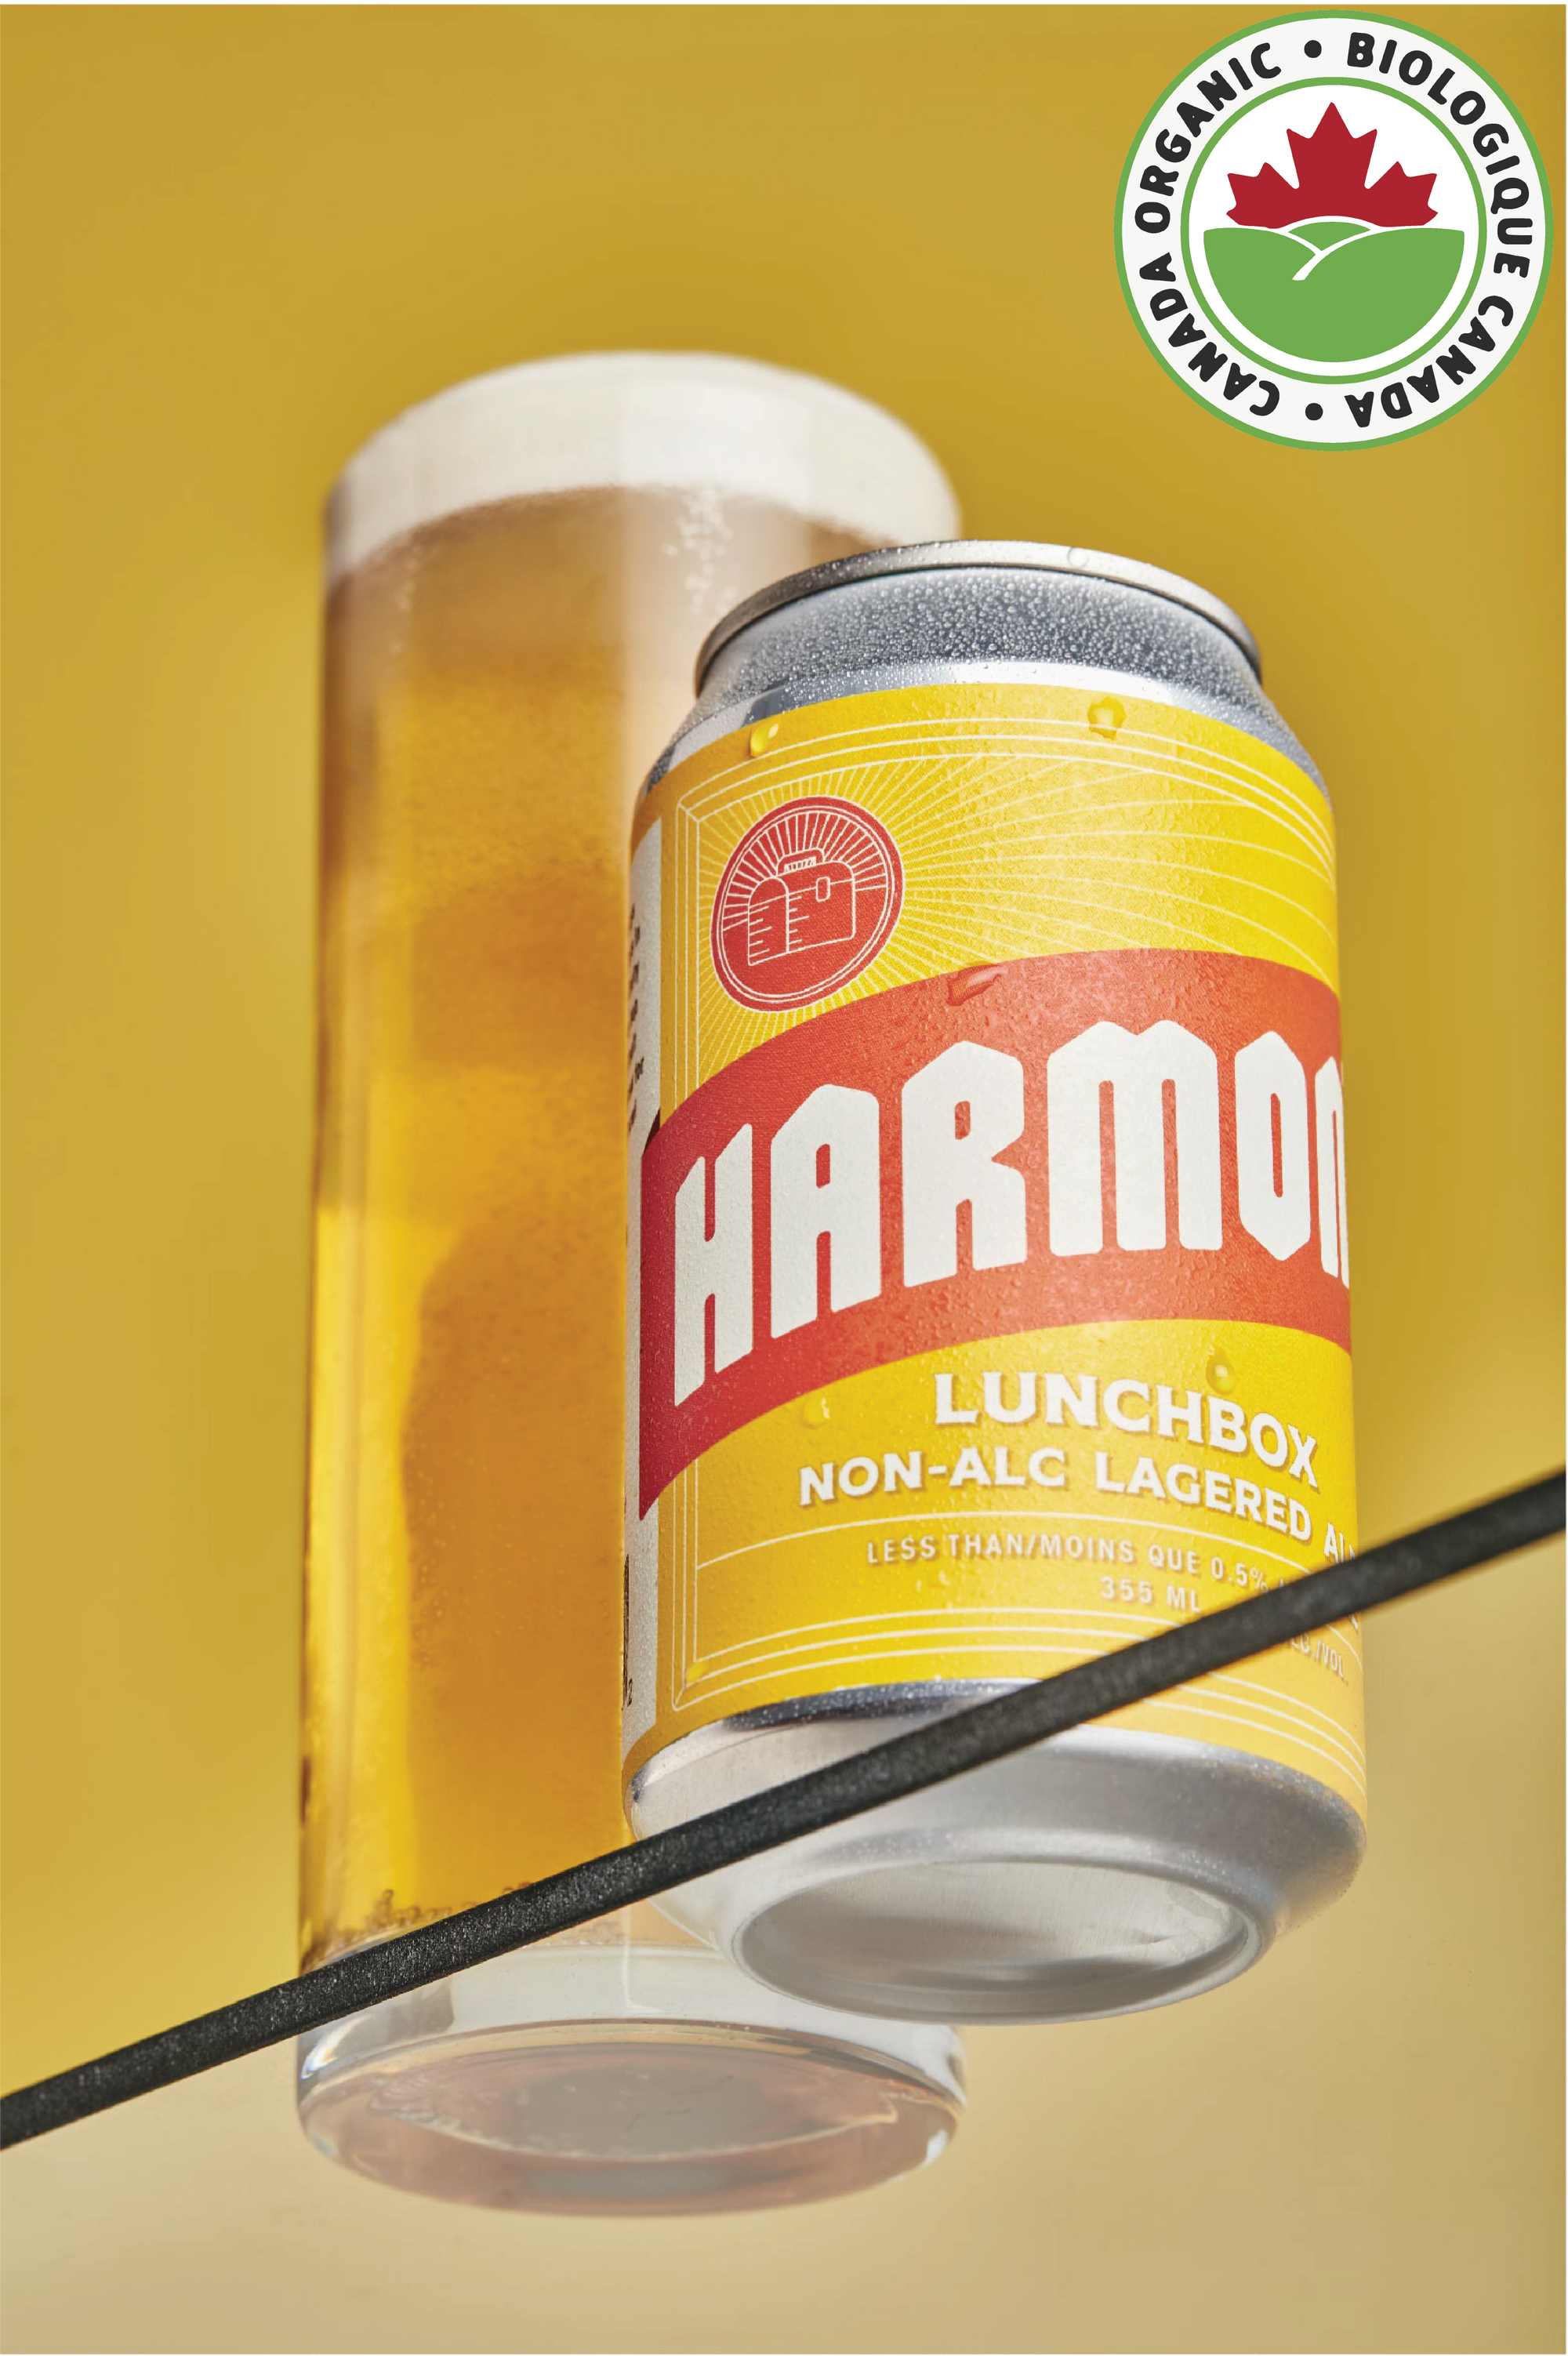 Harmon's Lunchbox Non-Alc Lagered Ale